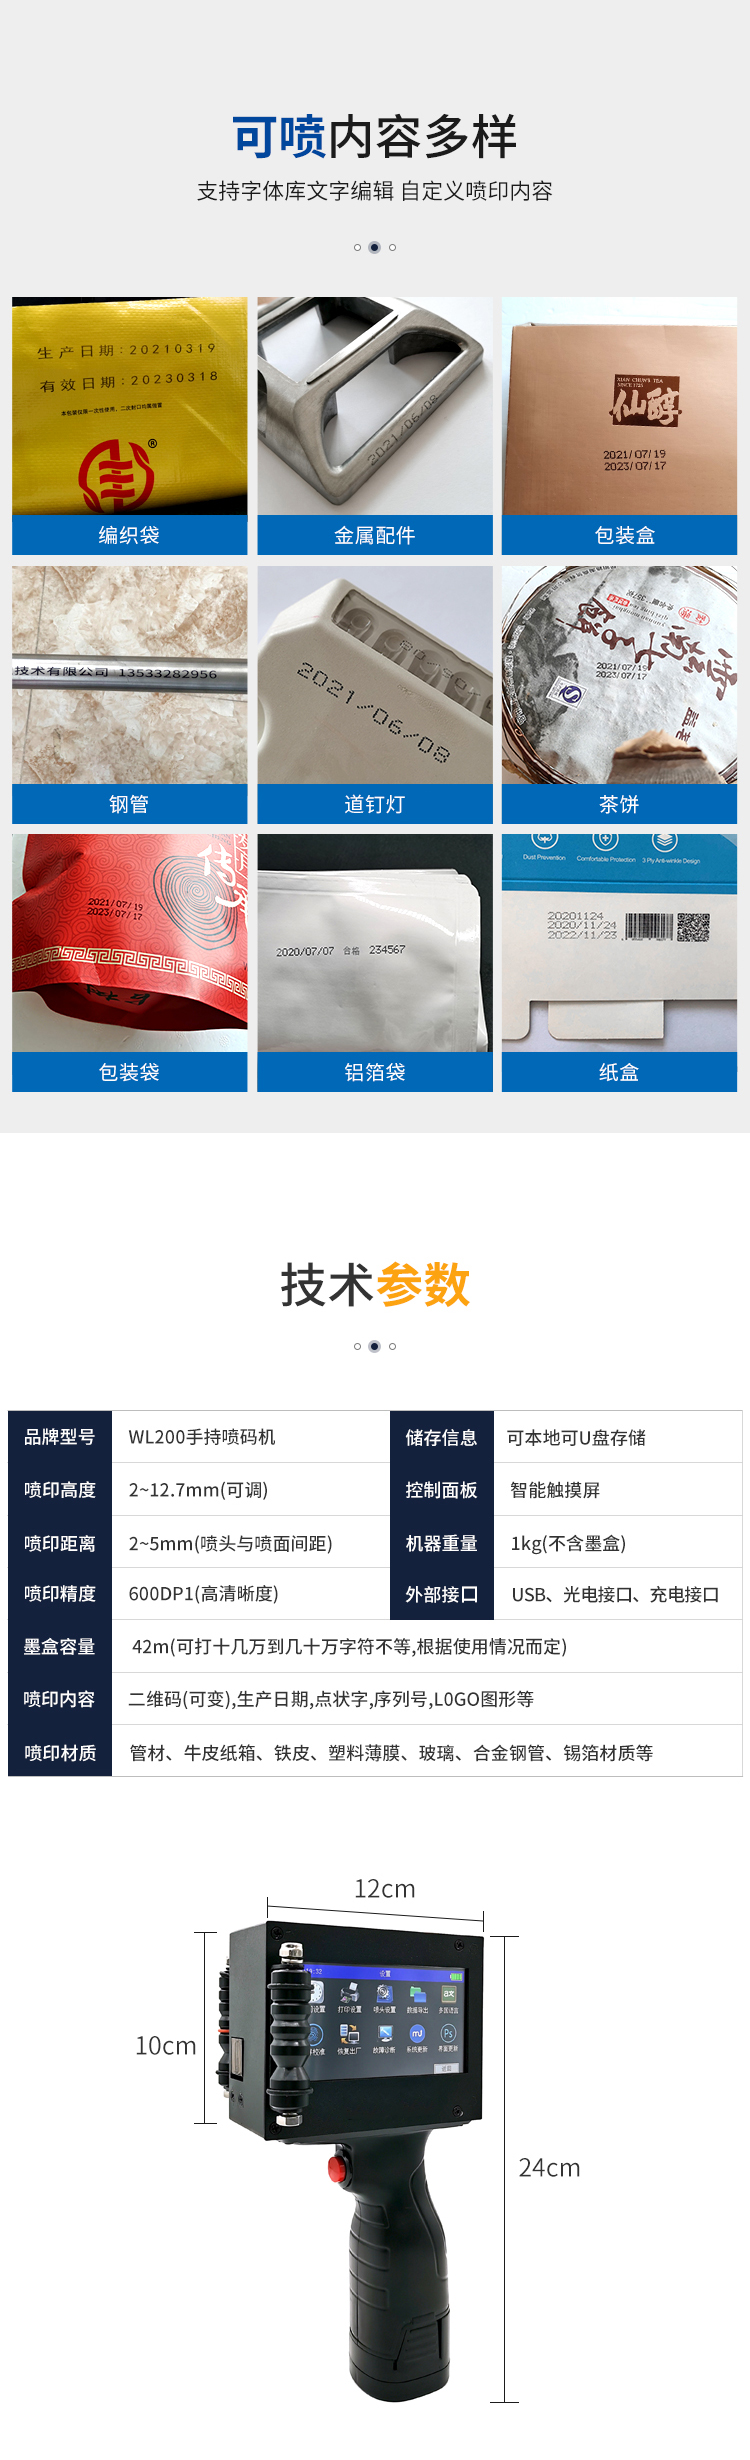 Outer box packaging box Food packaging Portable inkjet printer Small inkjet date printer Weixiang